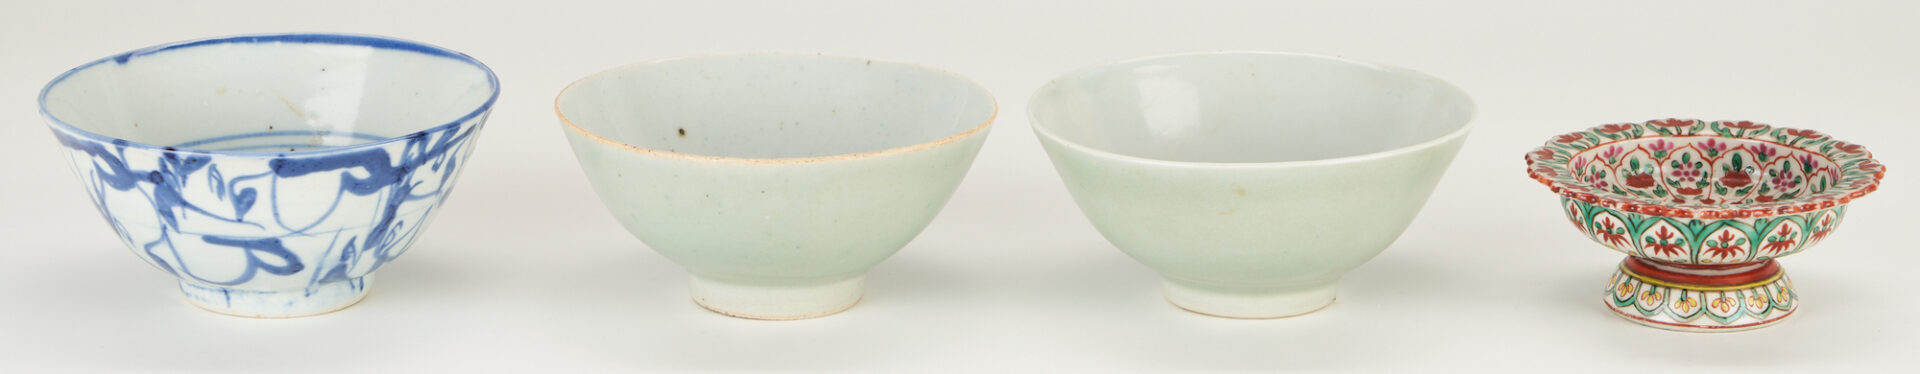 Lot 961: 6 Asian Porcelain Items, incl. Double Gourd Vases and Chinese Export